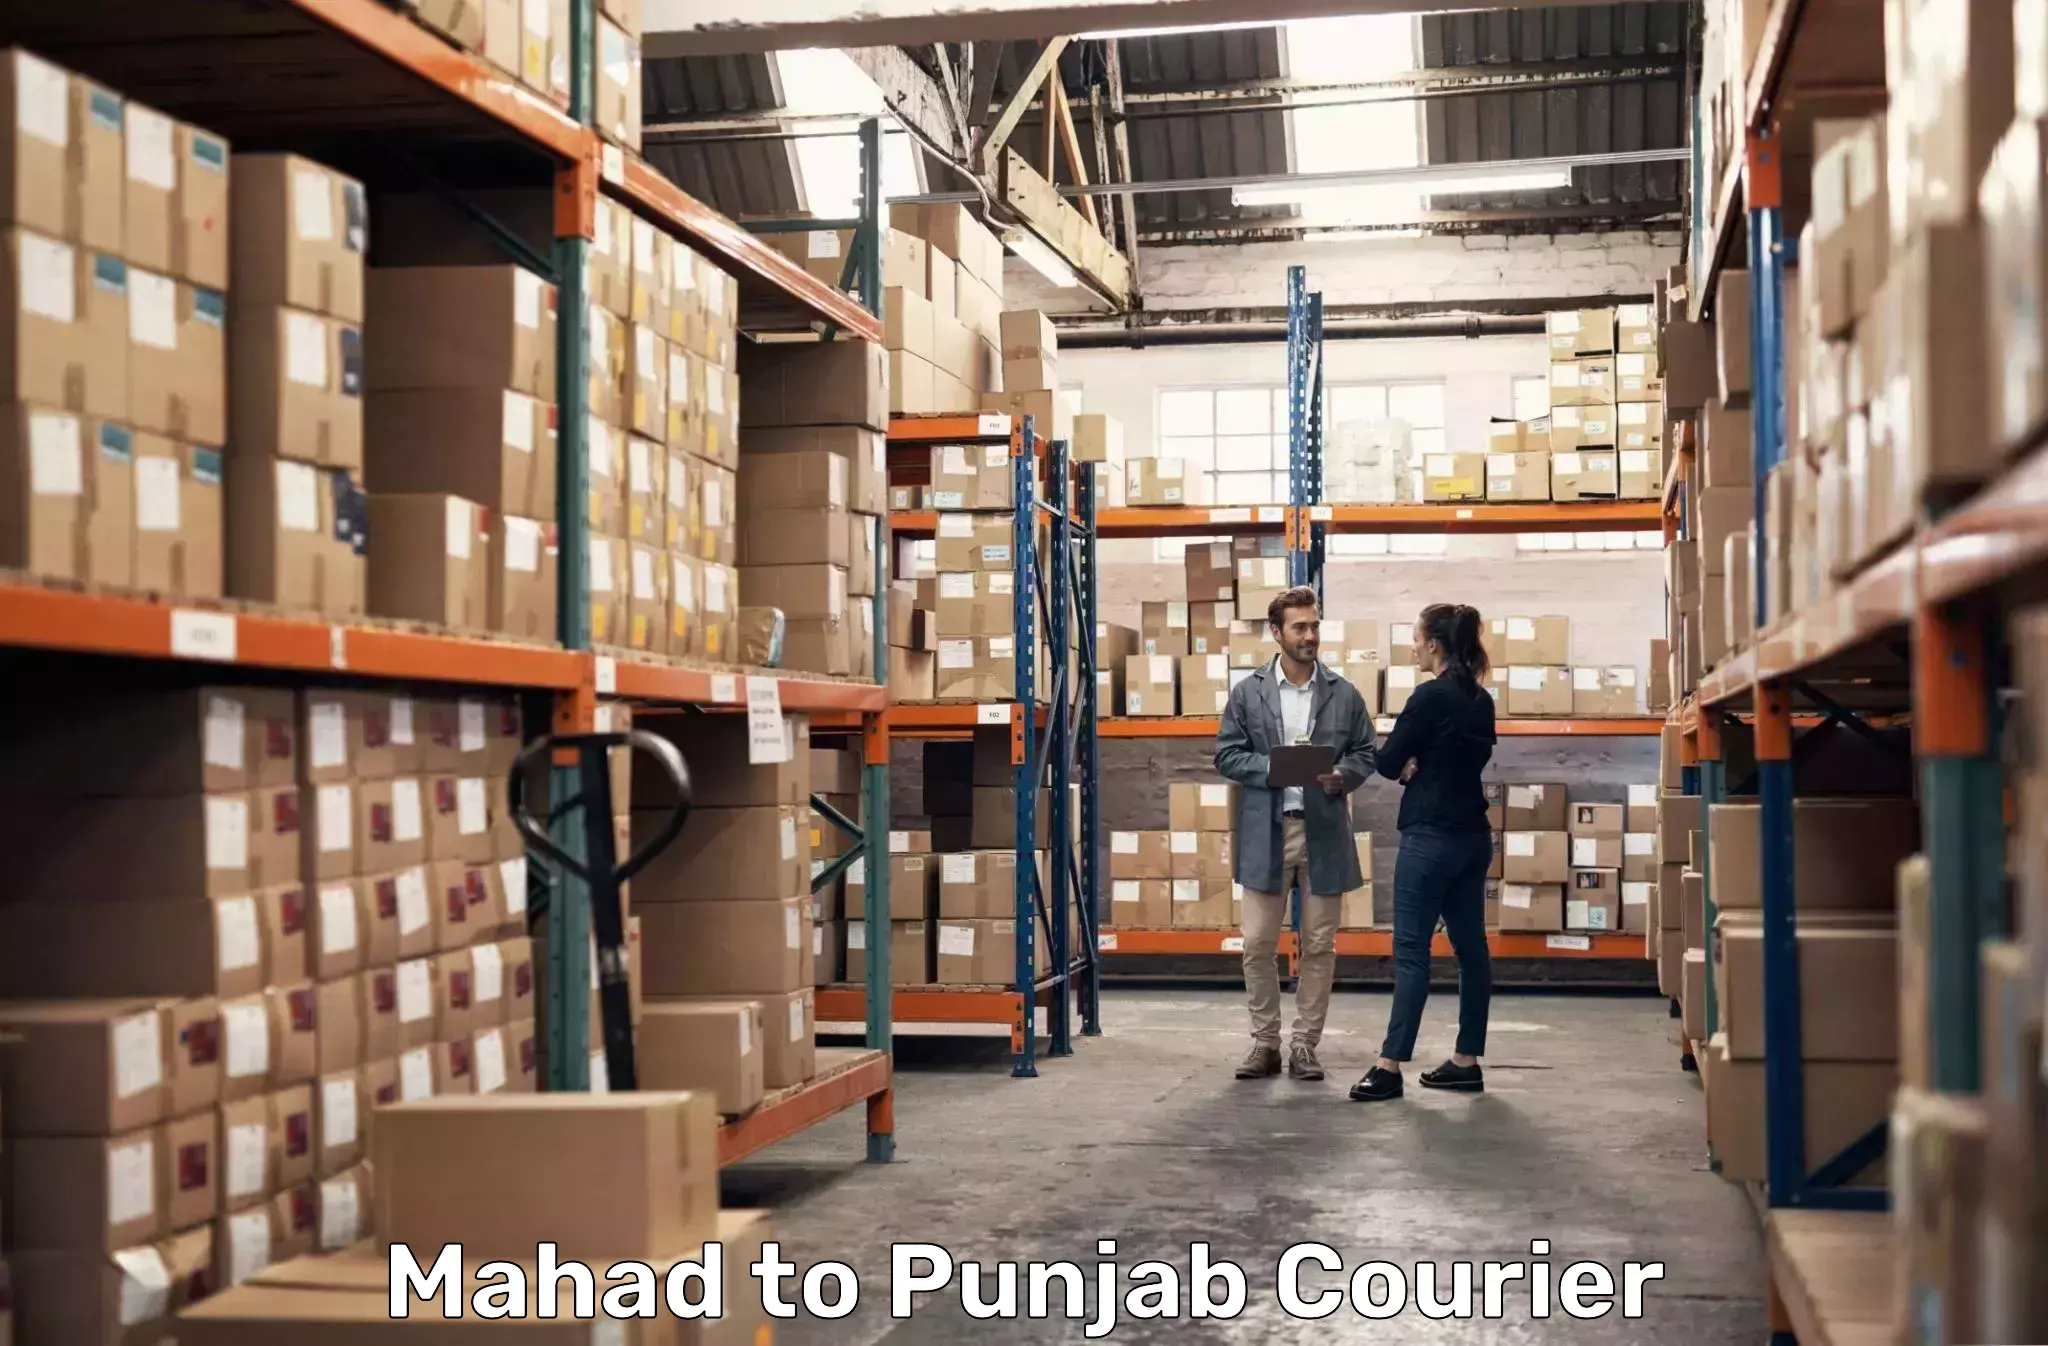 Air courier services in Mahad to Tarsikka